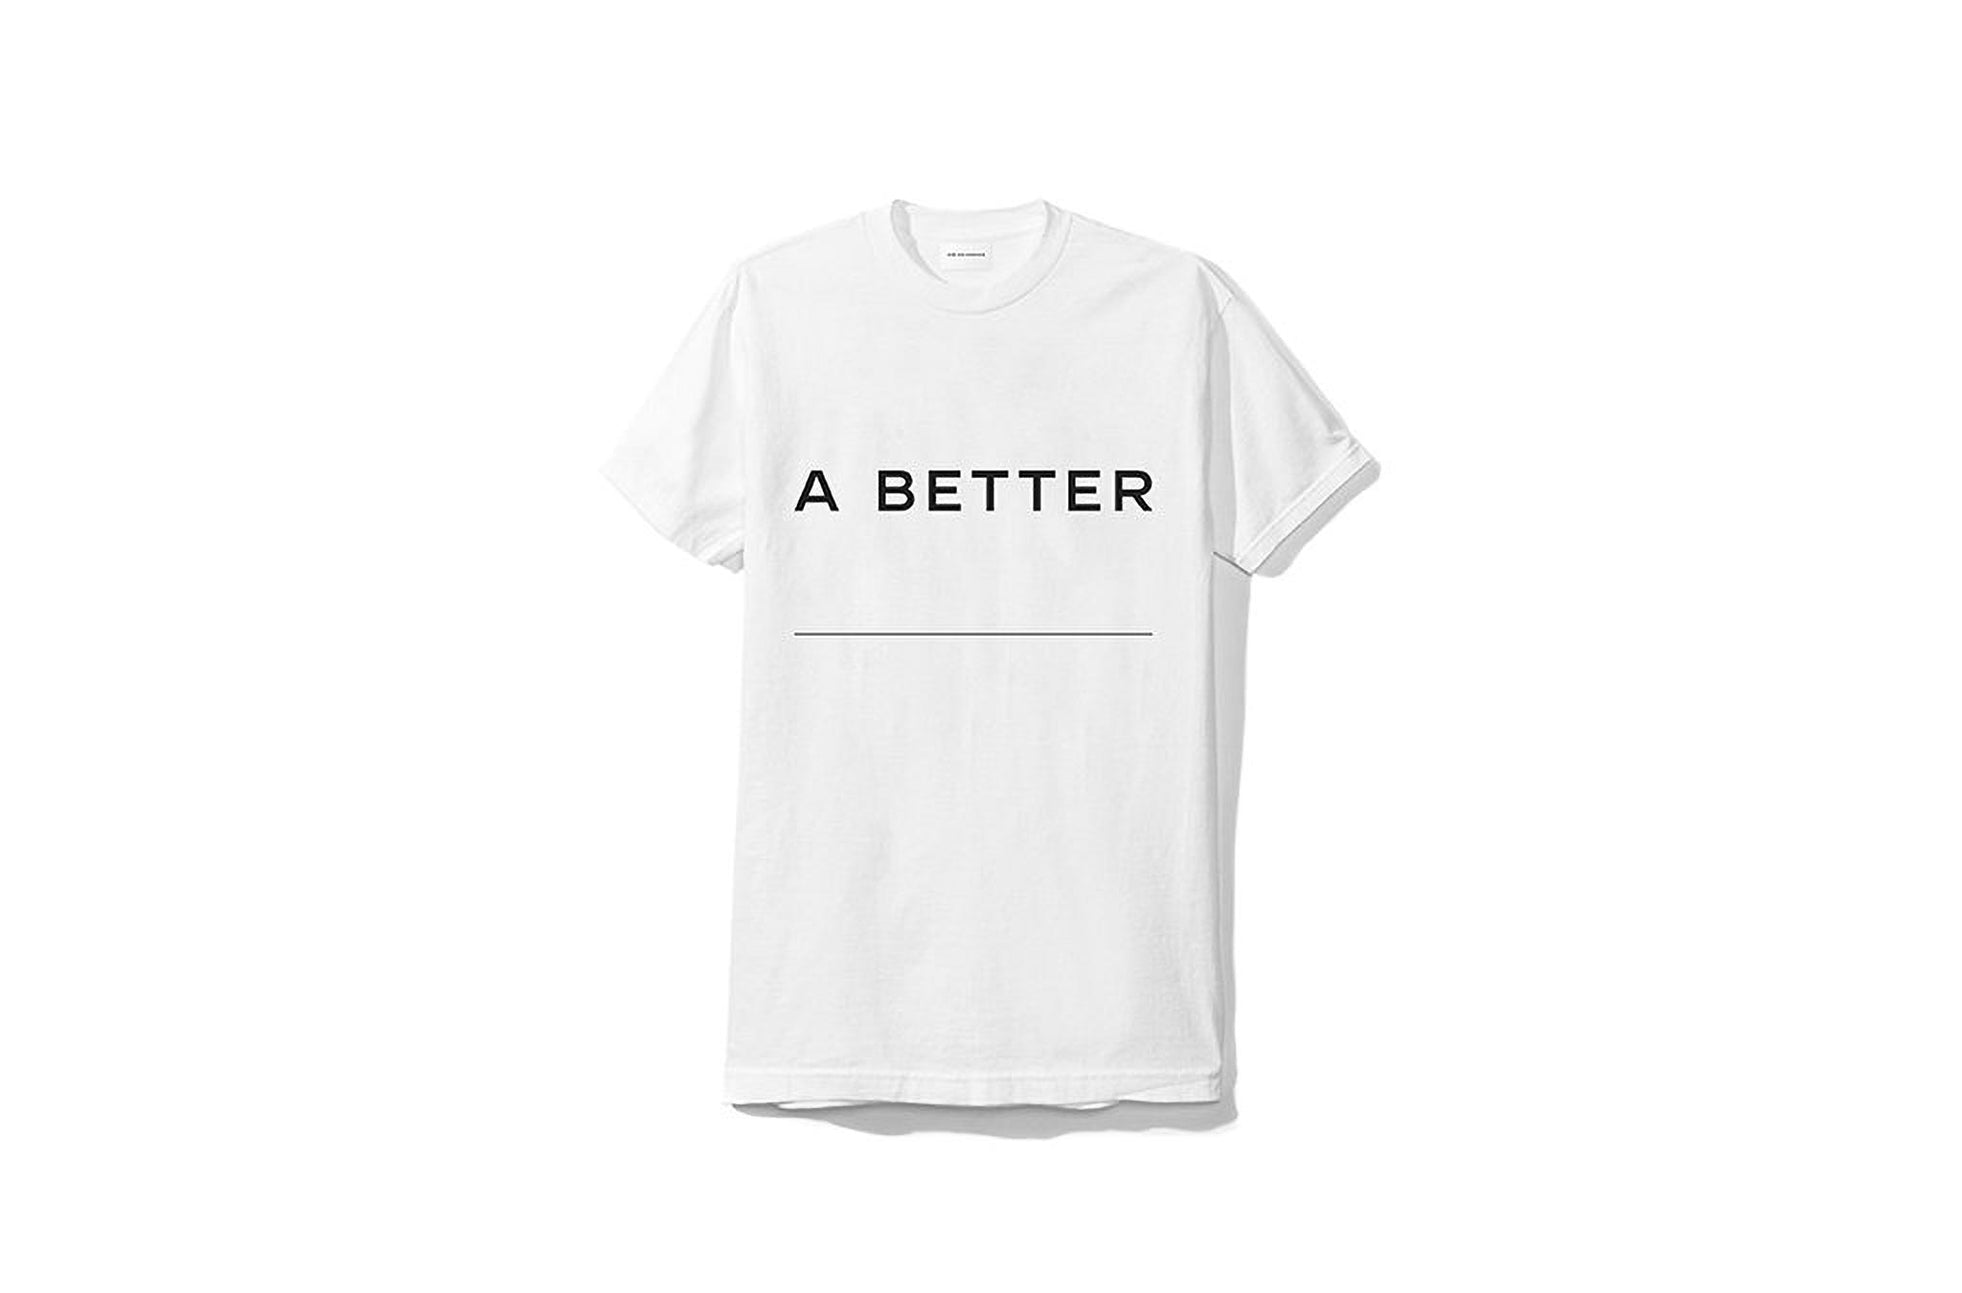 A Better Shirt - Sample Sale in Women's Shirt in White image 1